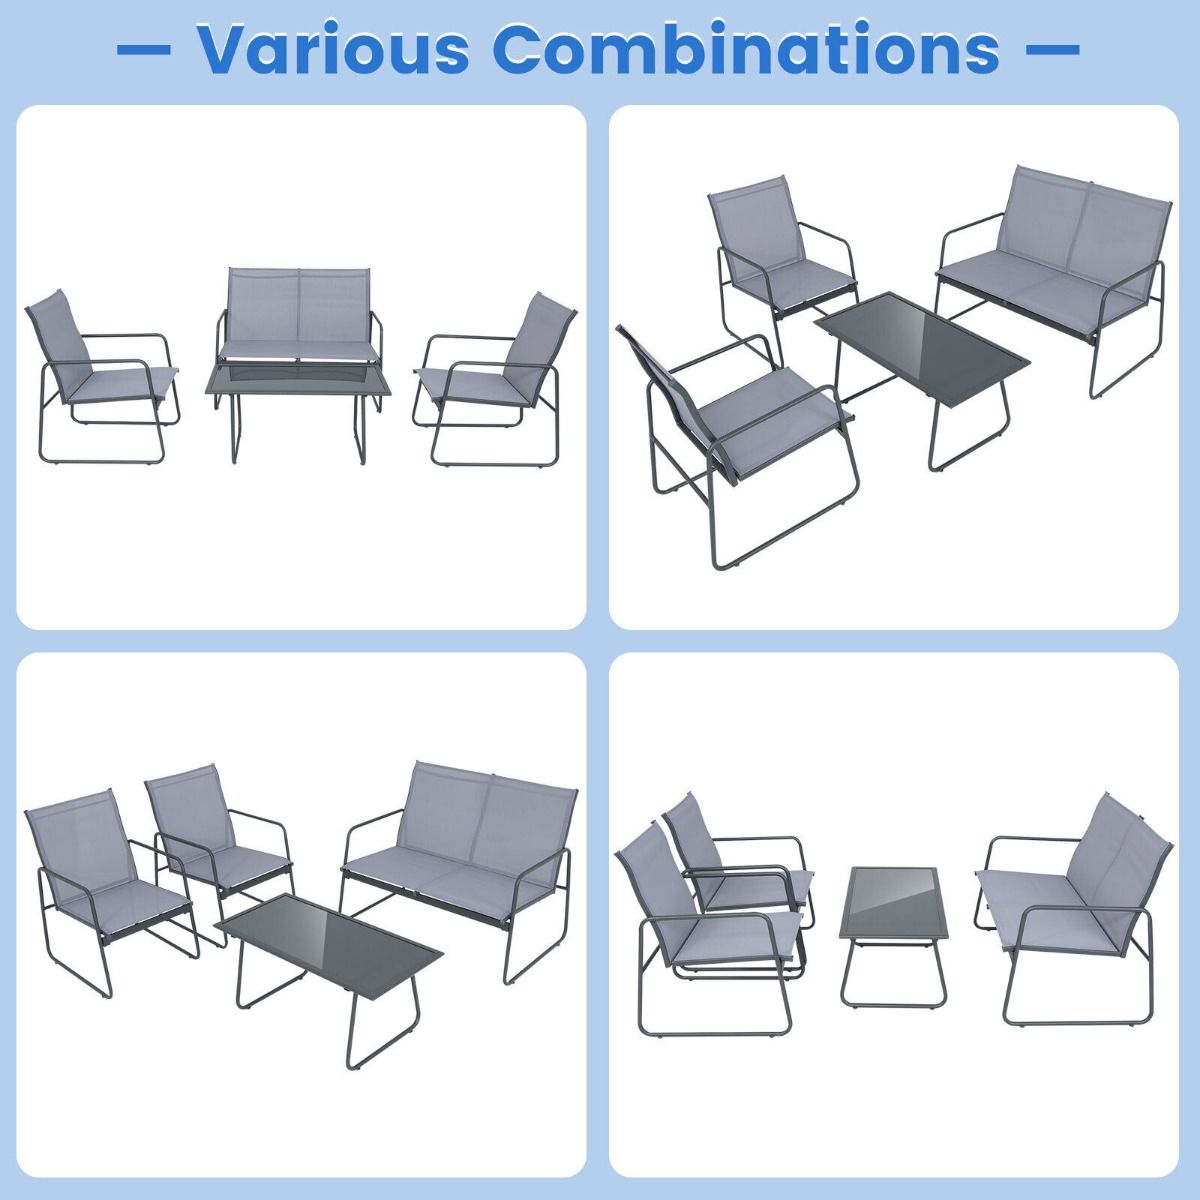 4 Piece Garden Patio Bistro Furniture Set with Loveseat, Coffee Table and 2 Chairs